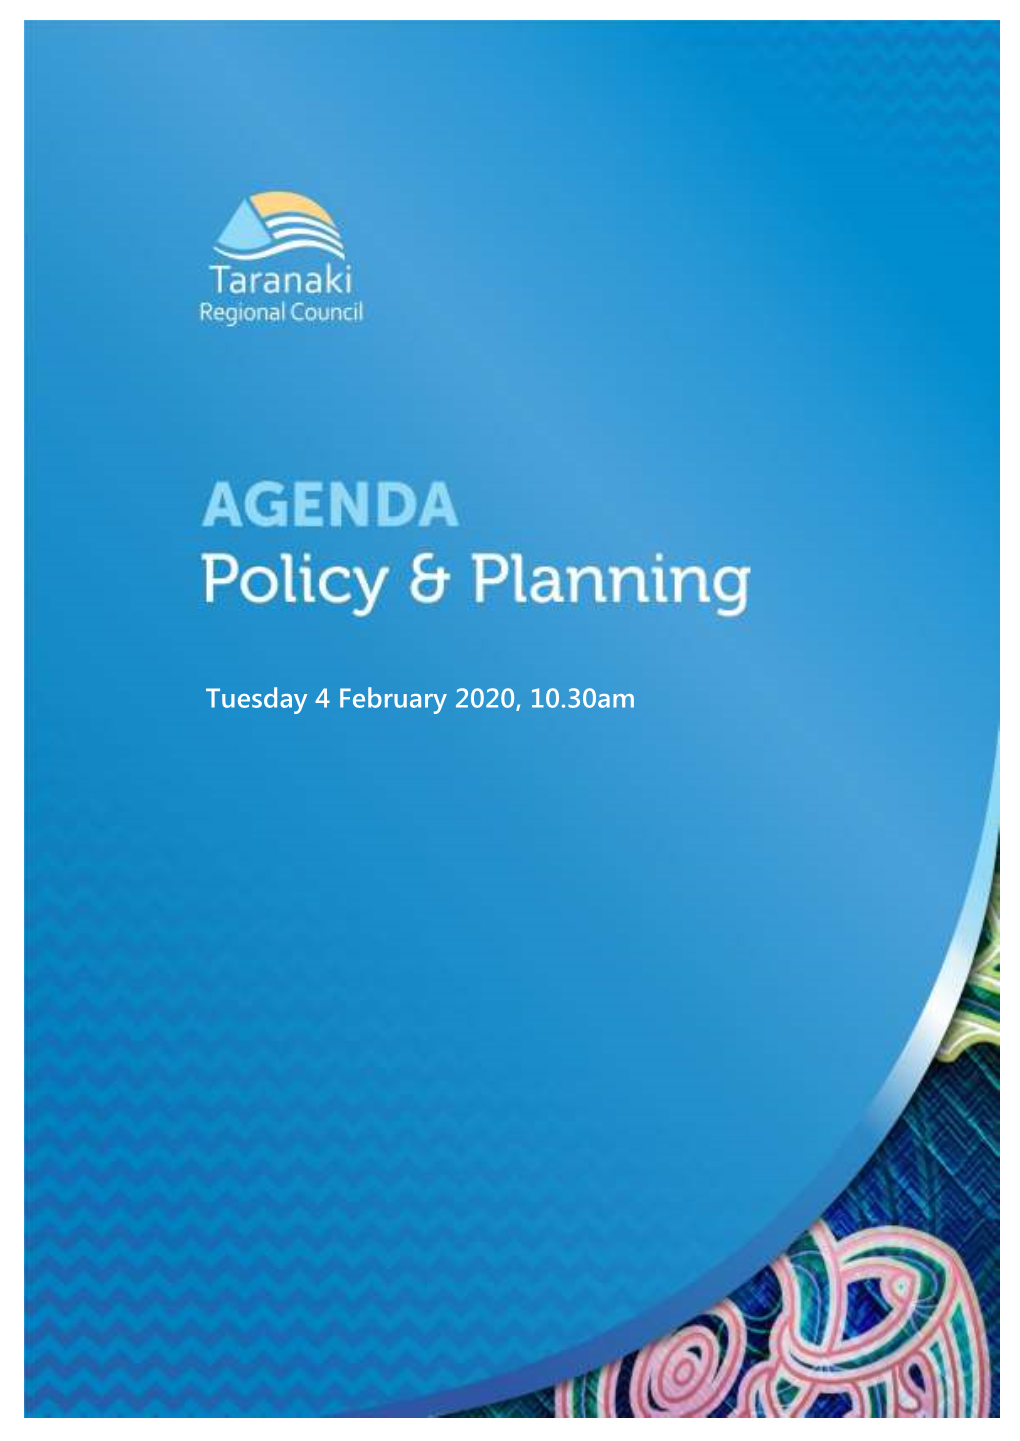 Policy & Planning Committee Agenda February 2020